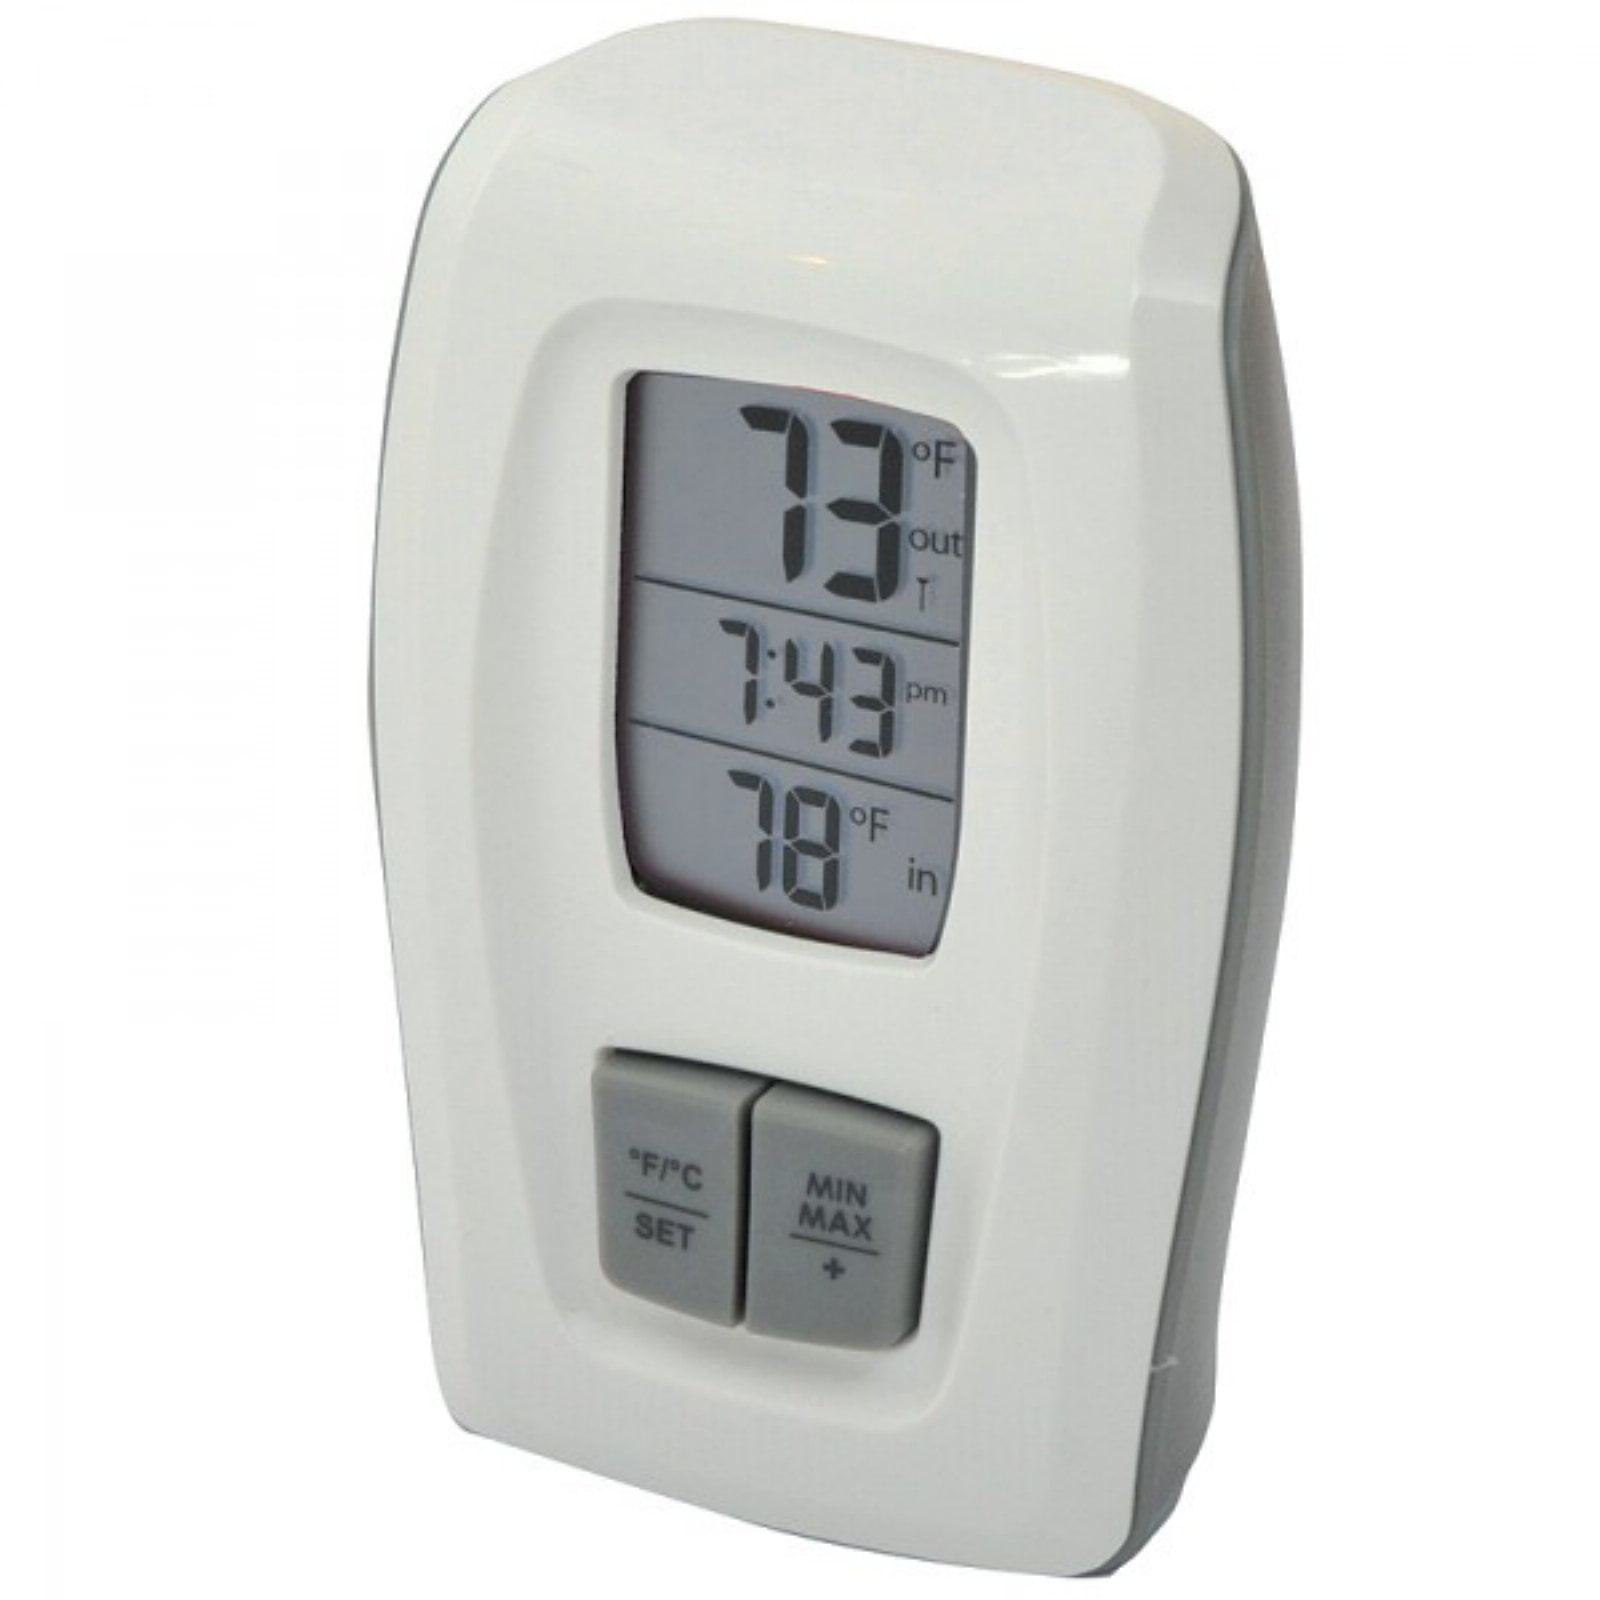 Acurite Wireless Thermometer Show Time Day Date Indoor/Outdoor Temperature